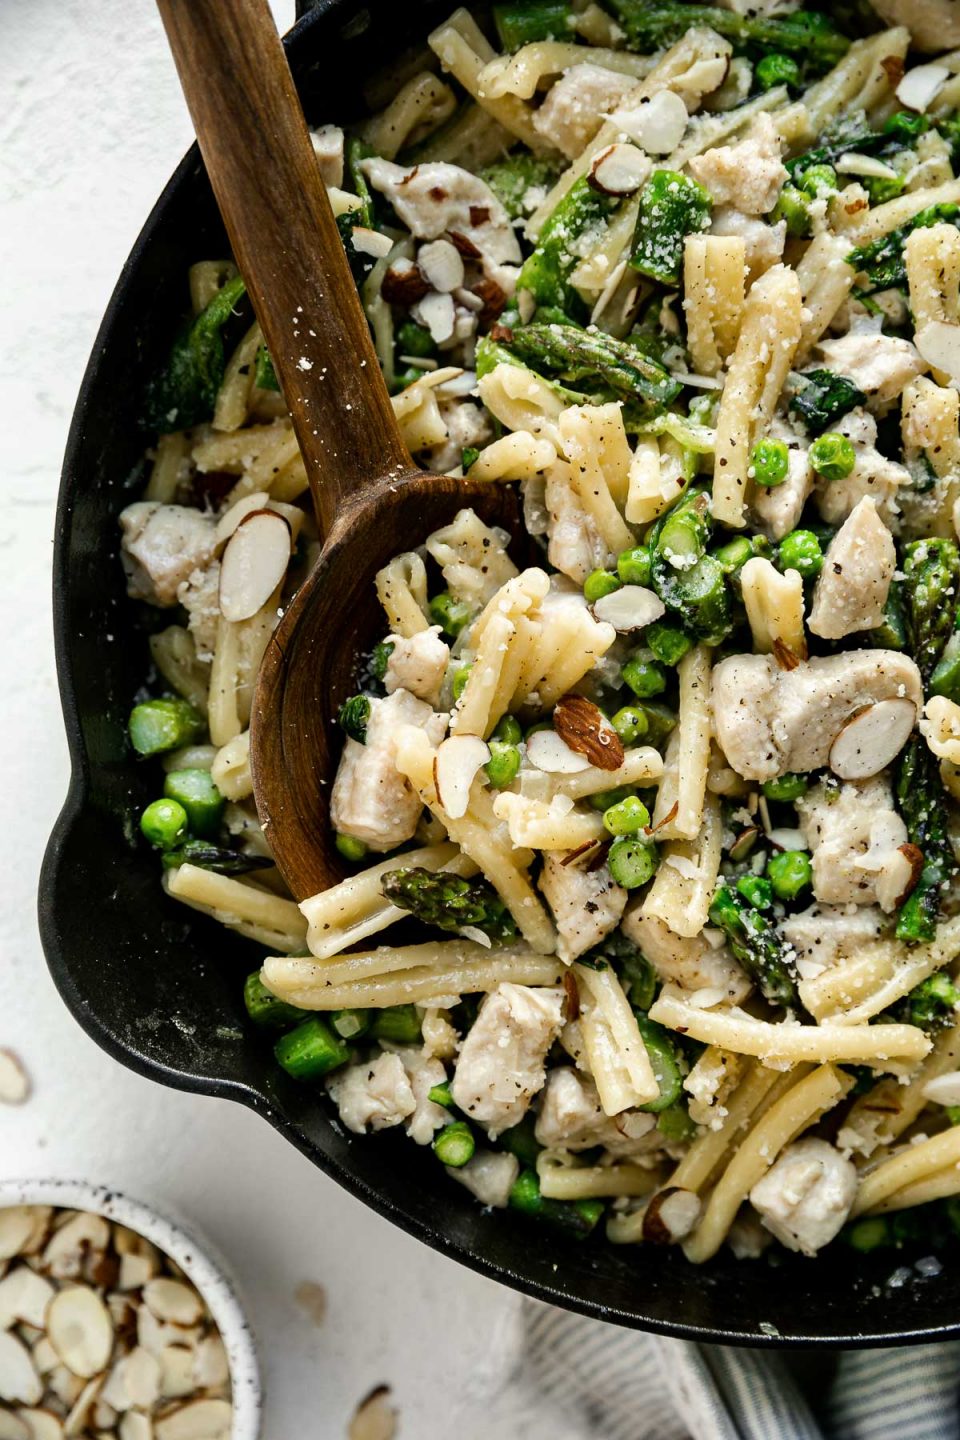 Close up of chicken asparagus pasta in a large black cast iron skillet, atop a white surface. There is a wooden serving spoon nestled in the pasta. The skillet is surrounded by a blue & white striped linen napkin & a small dish of sliced almonds.